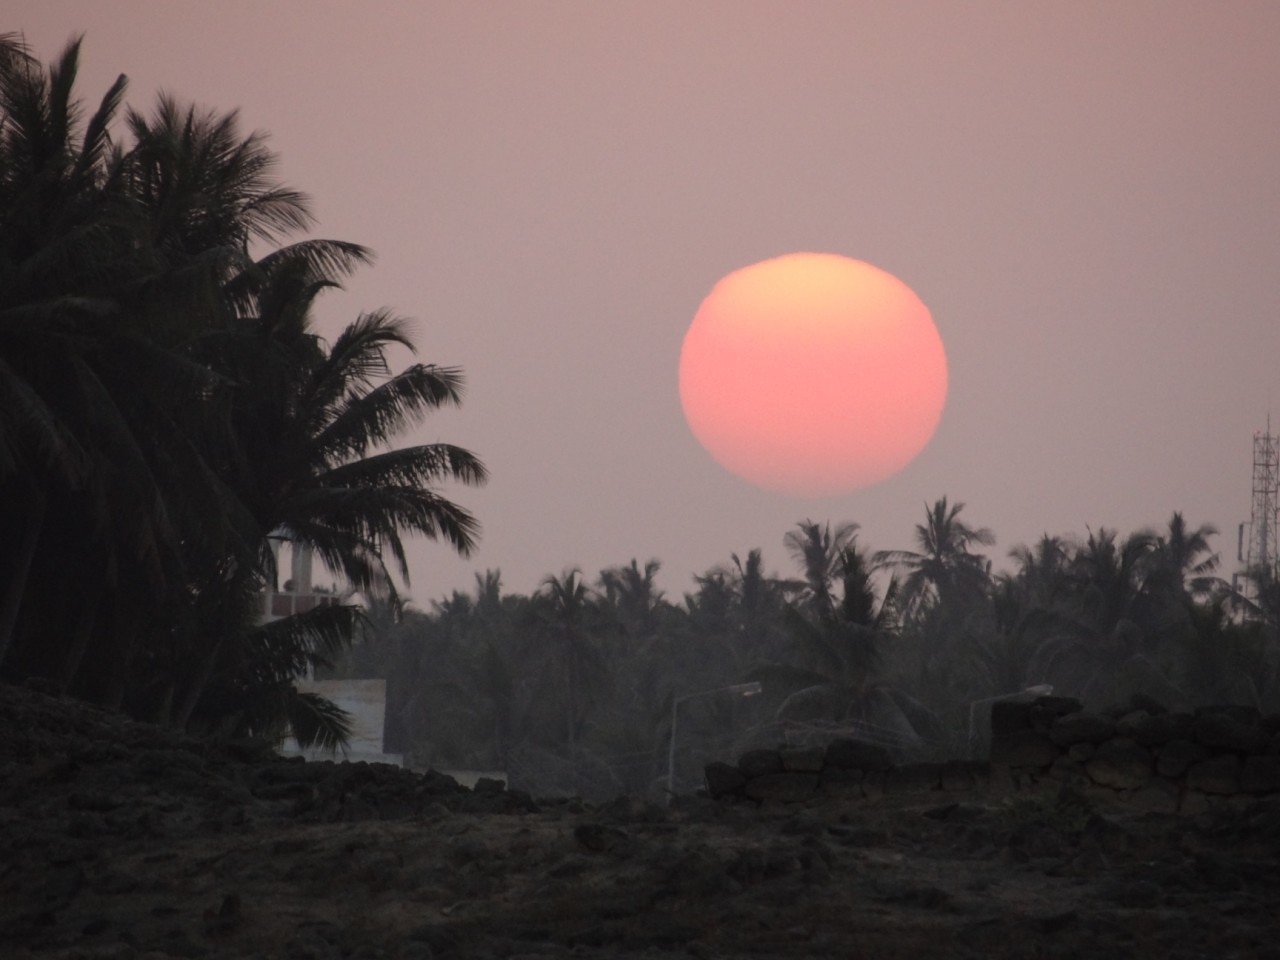 Amazing ruins from the old citadel of port of Salalah, you walk in the site, or ride a golf cart, you can also boat in groups, this is a sunset on the palms, authentic and natural. The museum has a lot of makets, potteries and shipping history memories & antics